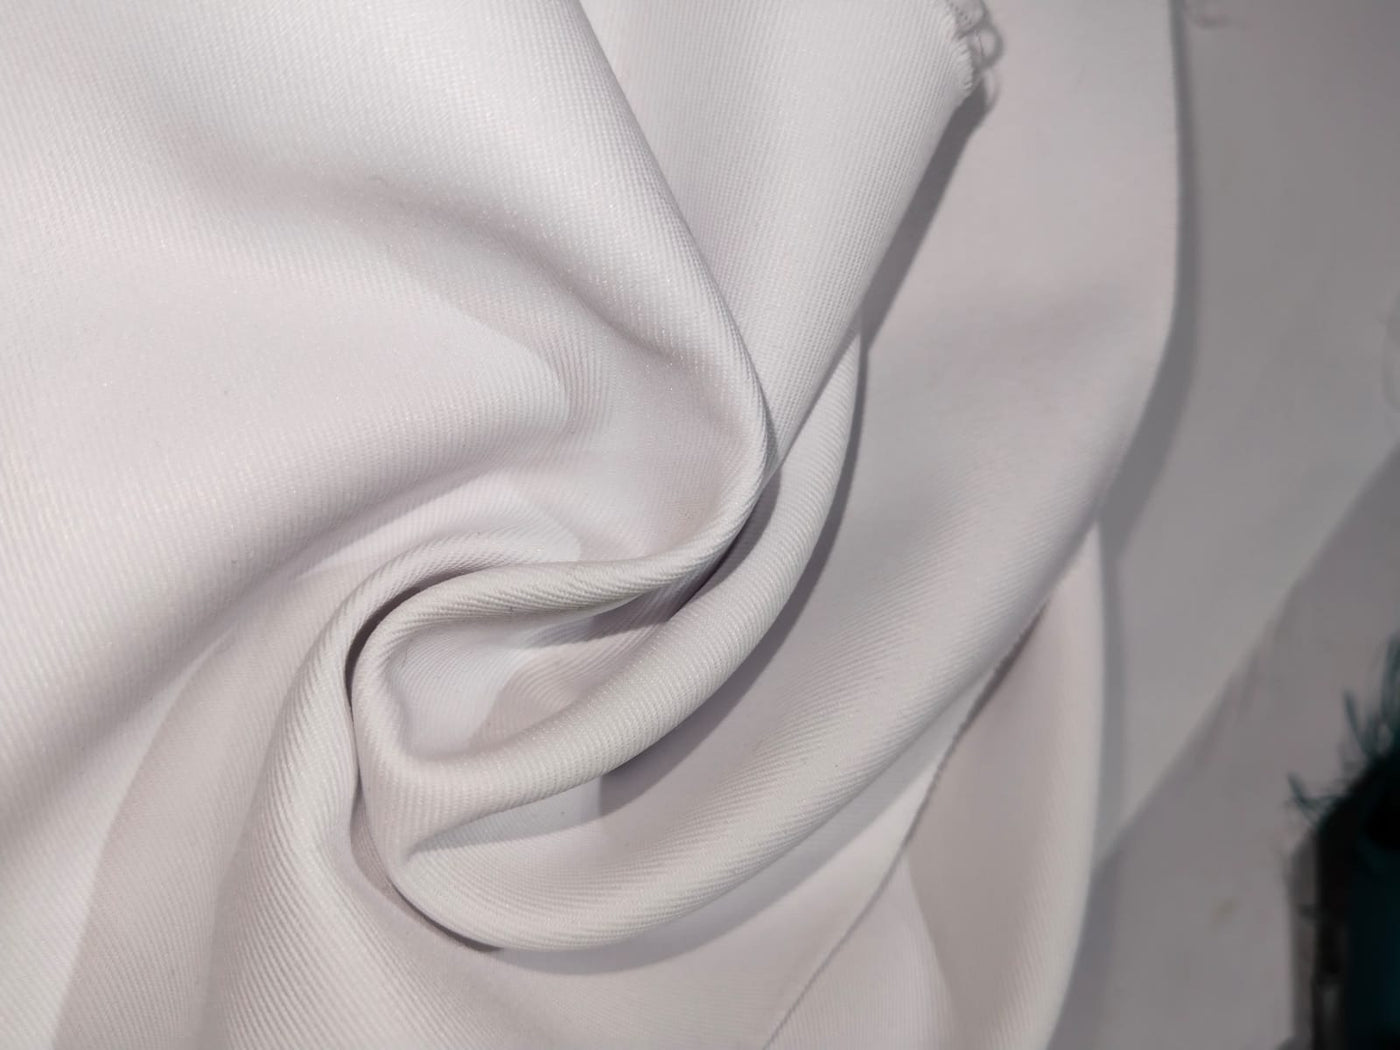 7 horses thin twill Fabric  58" wide available both in white as well as black